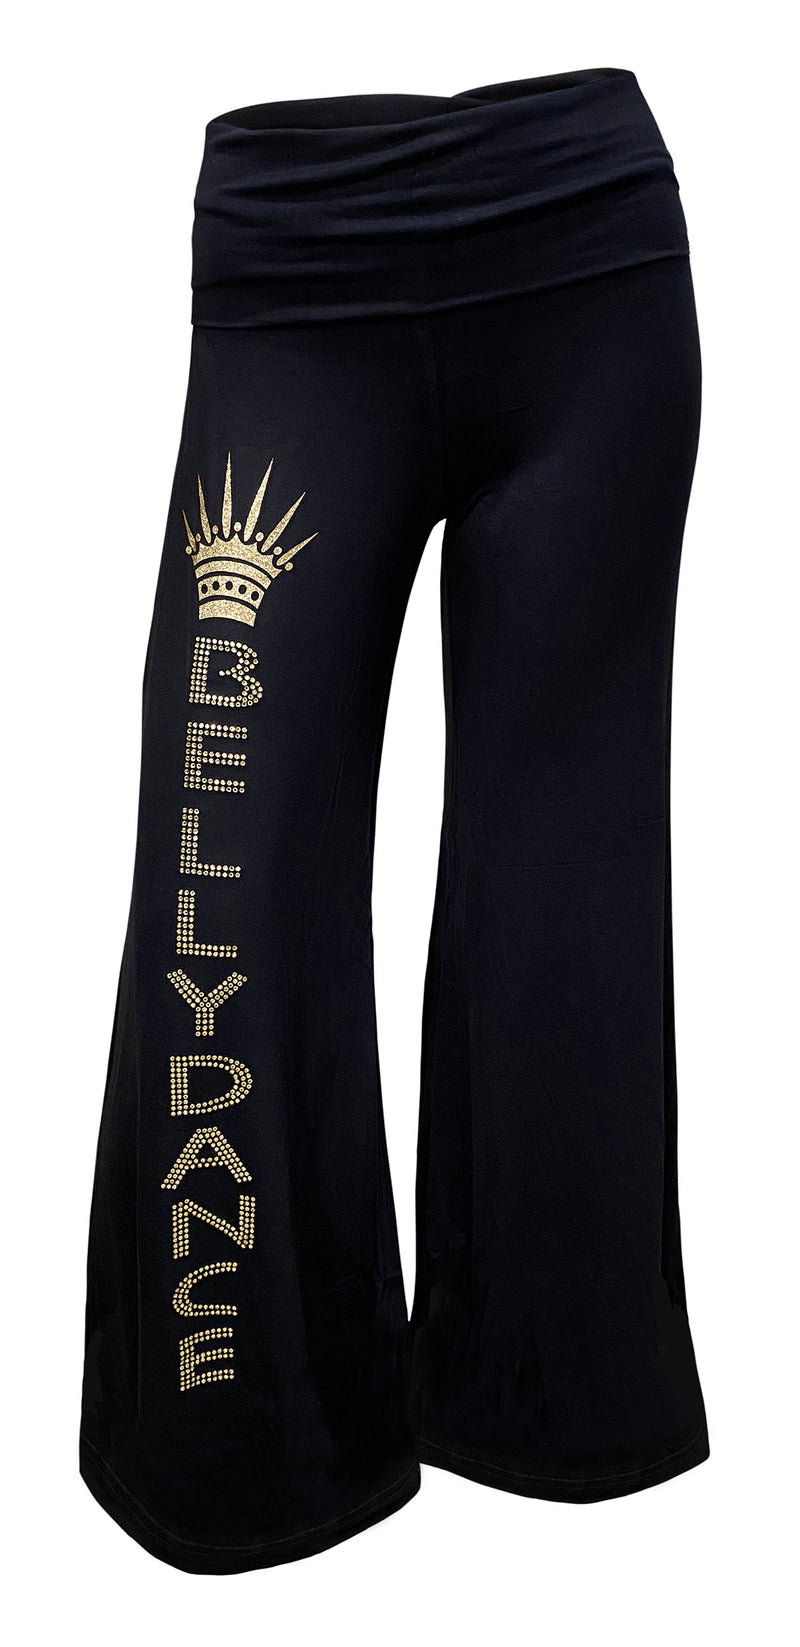 Dance wear Active wear full pant with rhinestone 'belly dance' trim in gold by Kaliopi Eleni